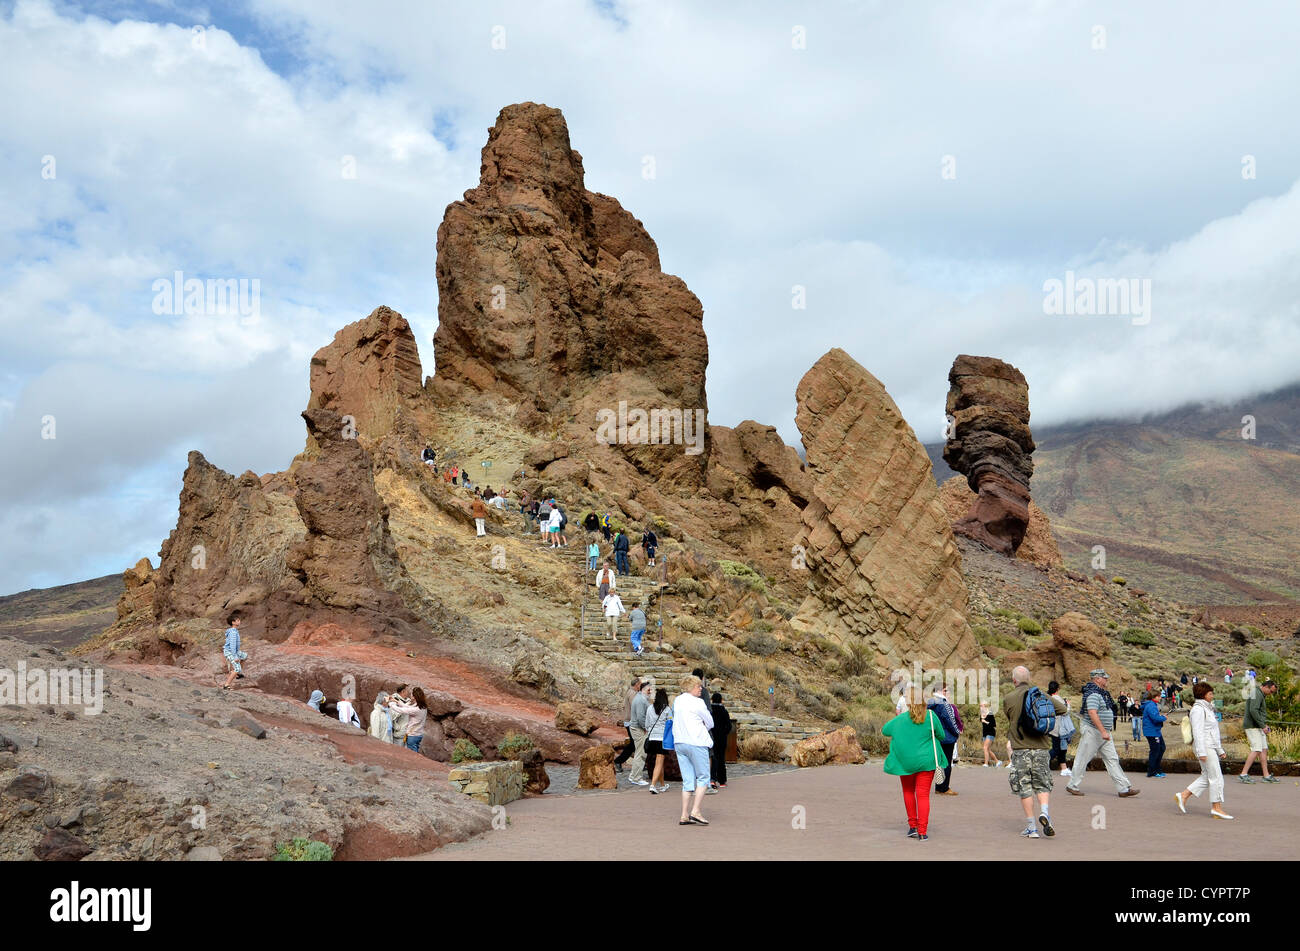 Tourists visit the Roques de Garcia in the canadas del teide national park on the island of Tenerife, Canary Islands Stock Photo